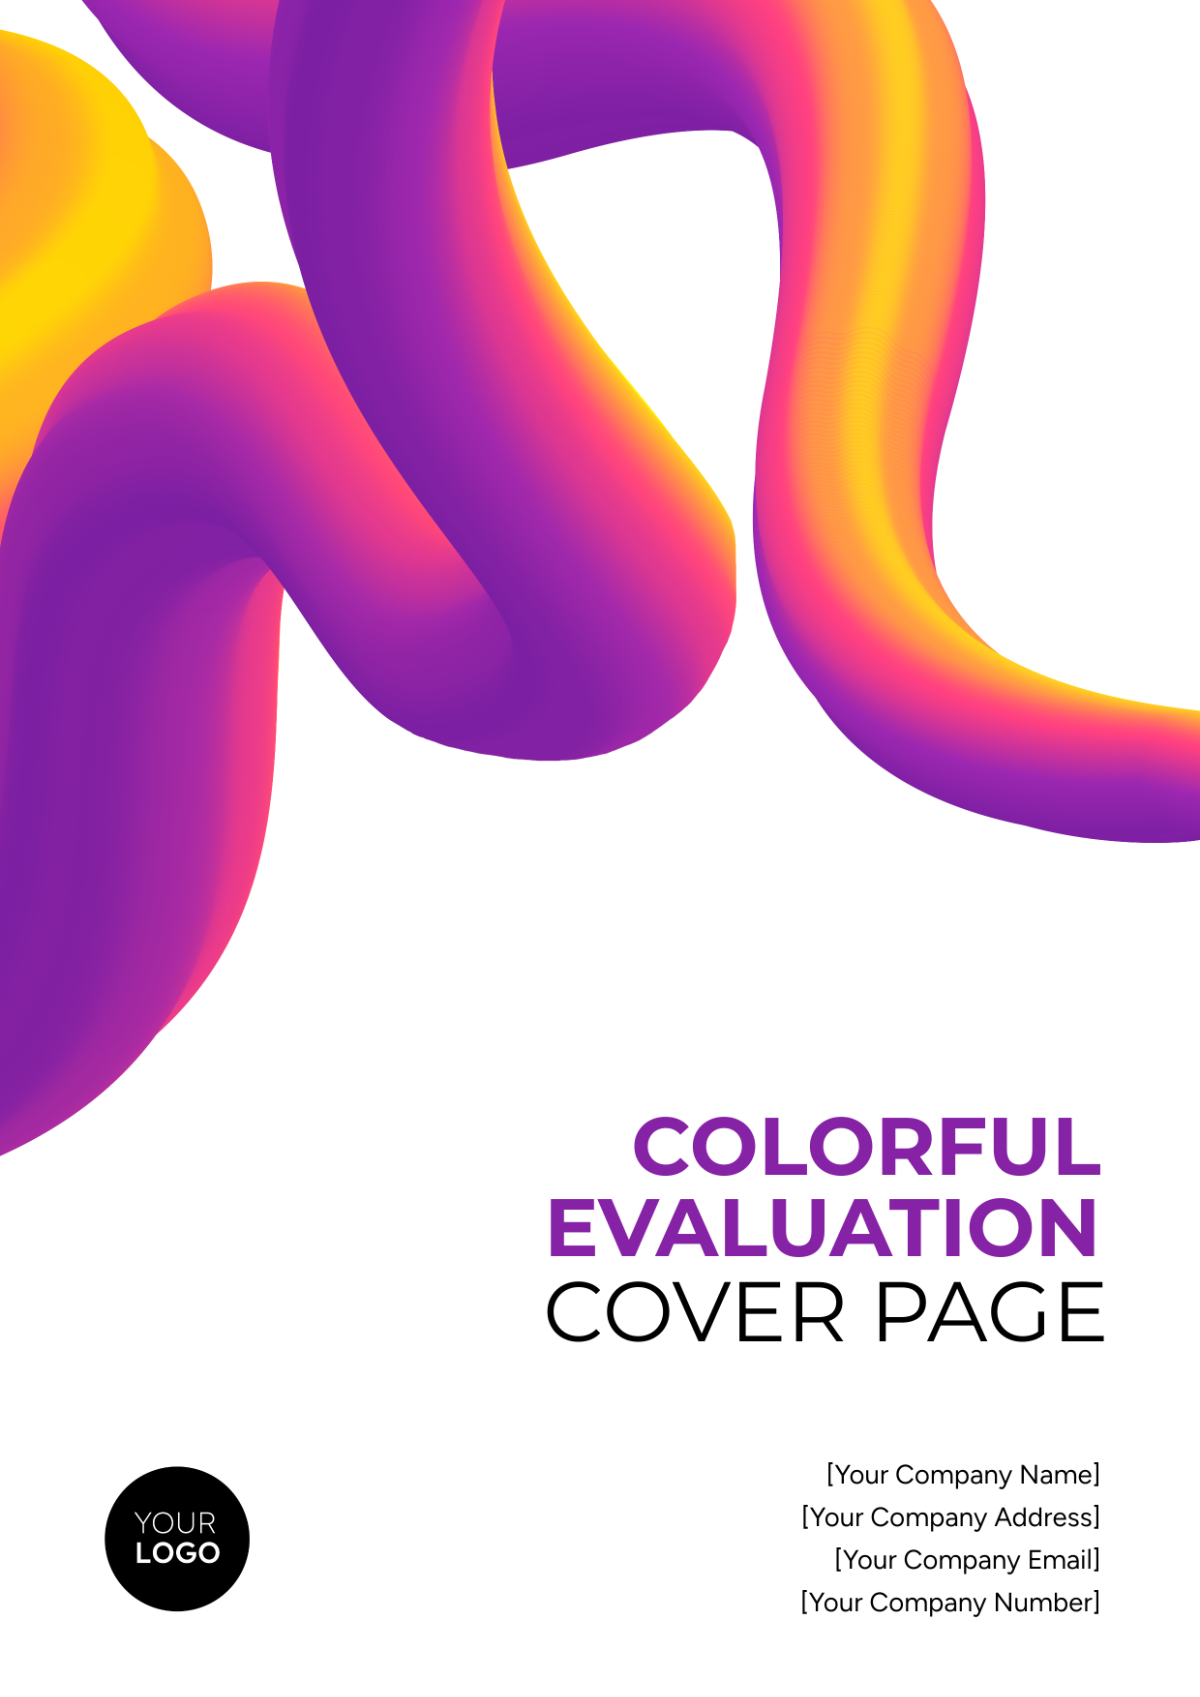 Colorful Evaluation Cover Page